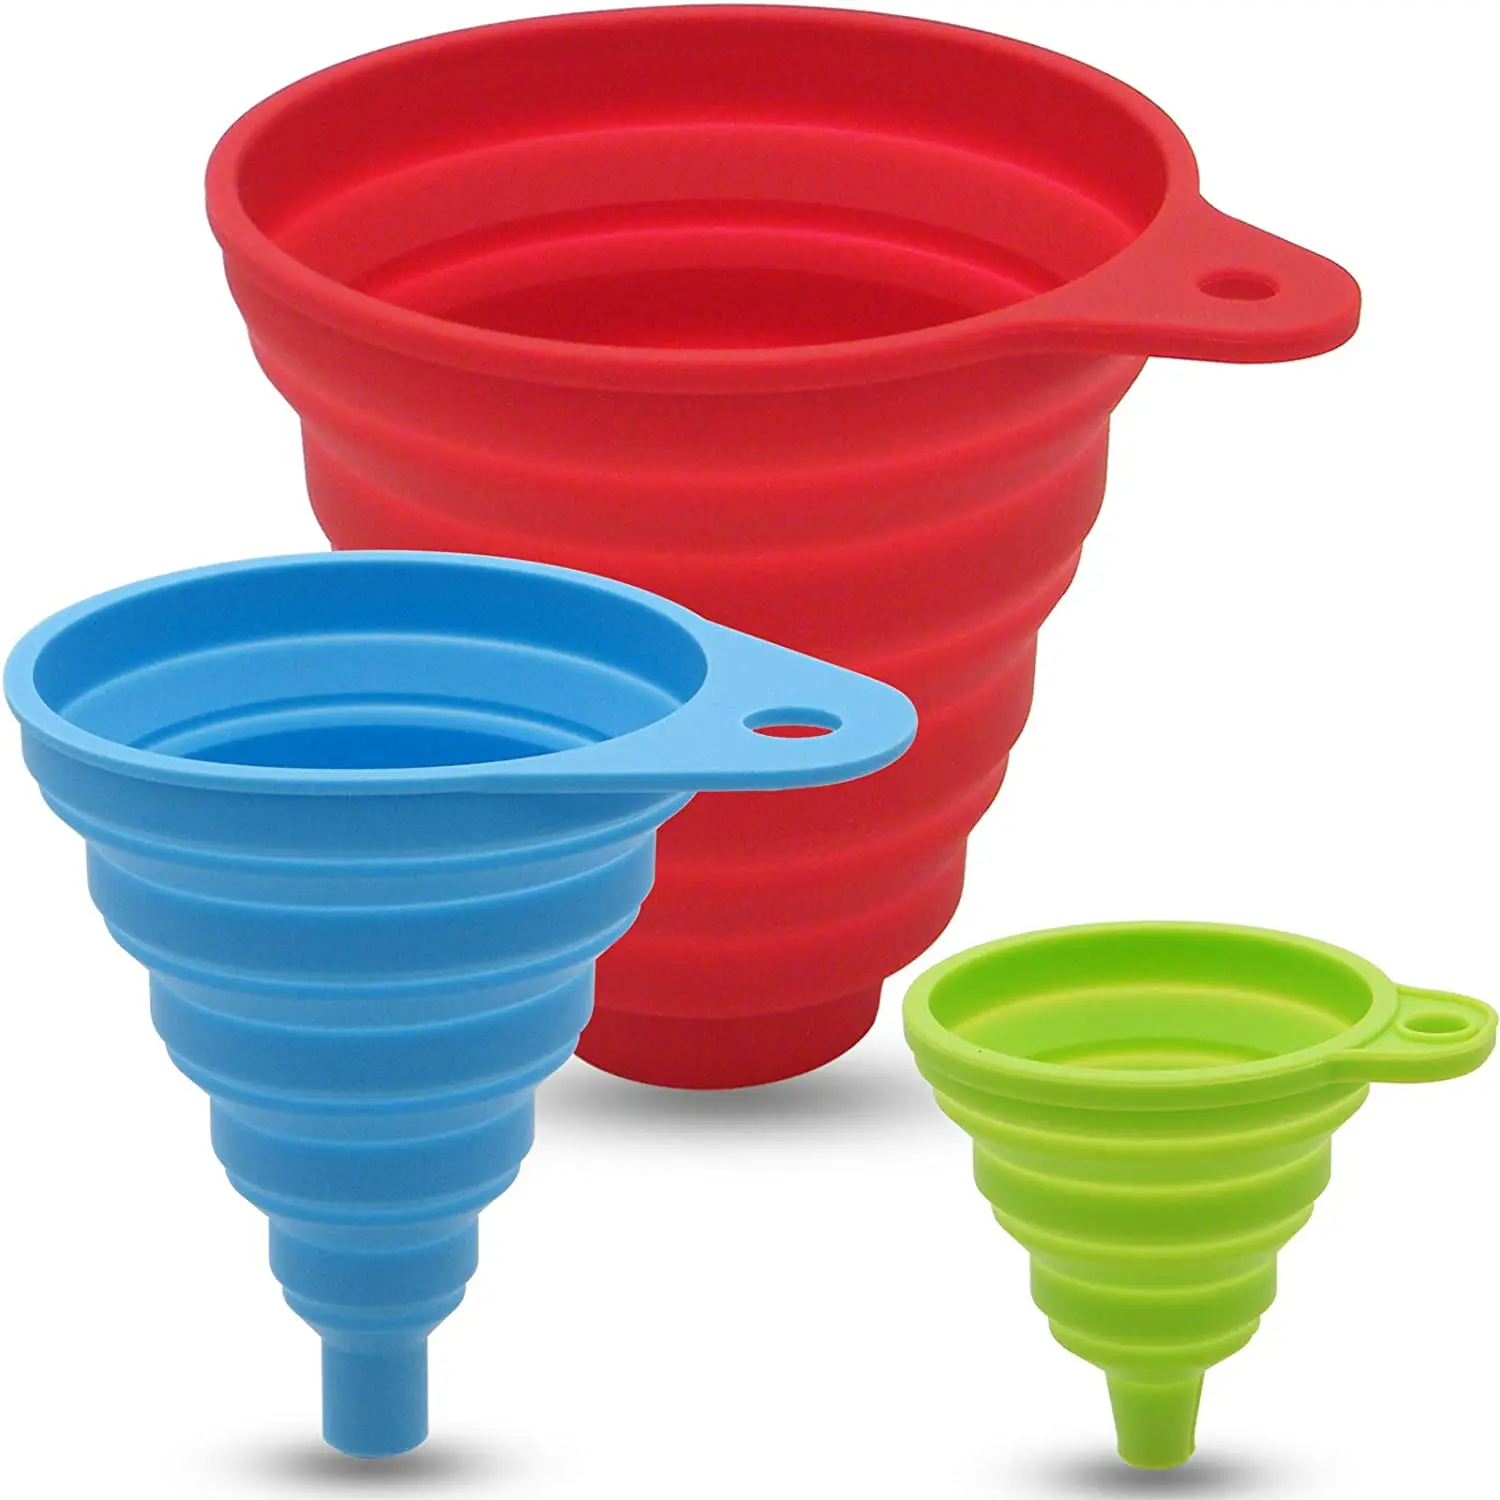 

Food Grade Silicone Collapsible Funnel Set, Large Funnel for Wide Mouth Jar, Small/Mini Funnel for Transfer Oil Powder, Green,orange,red,blue...